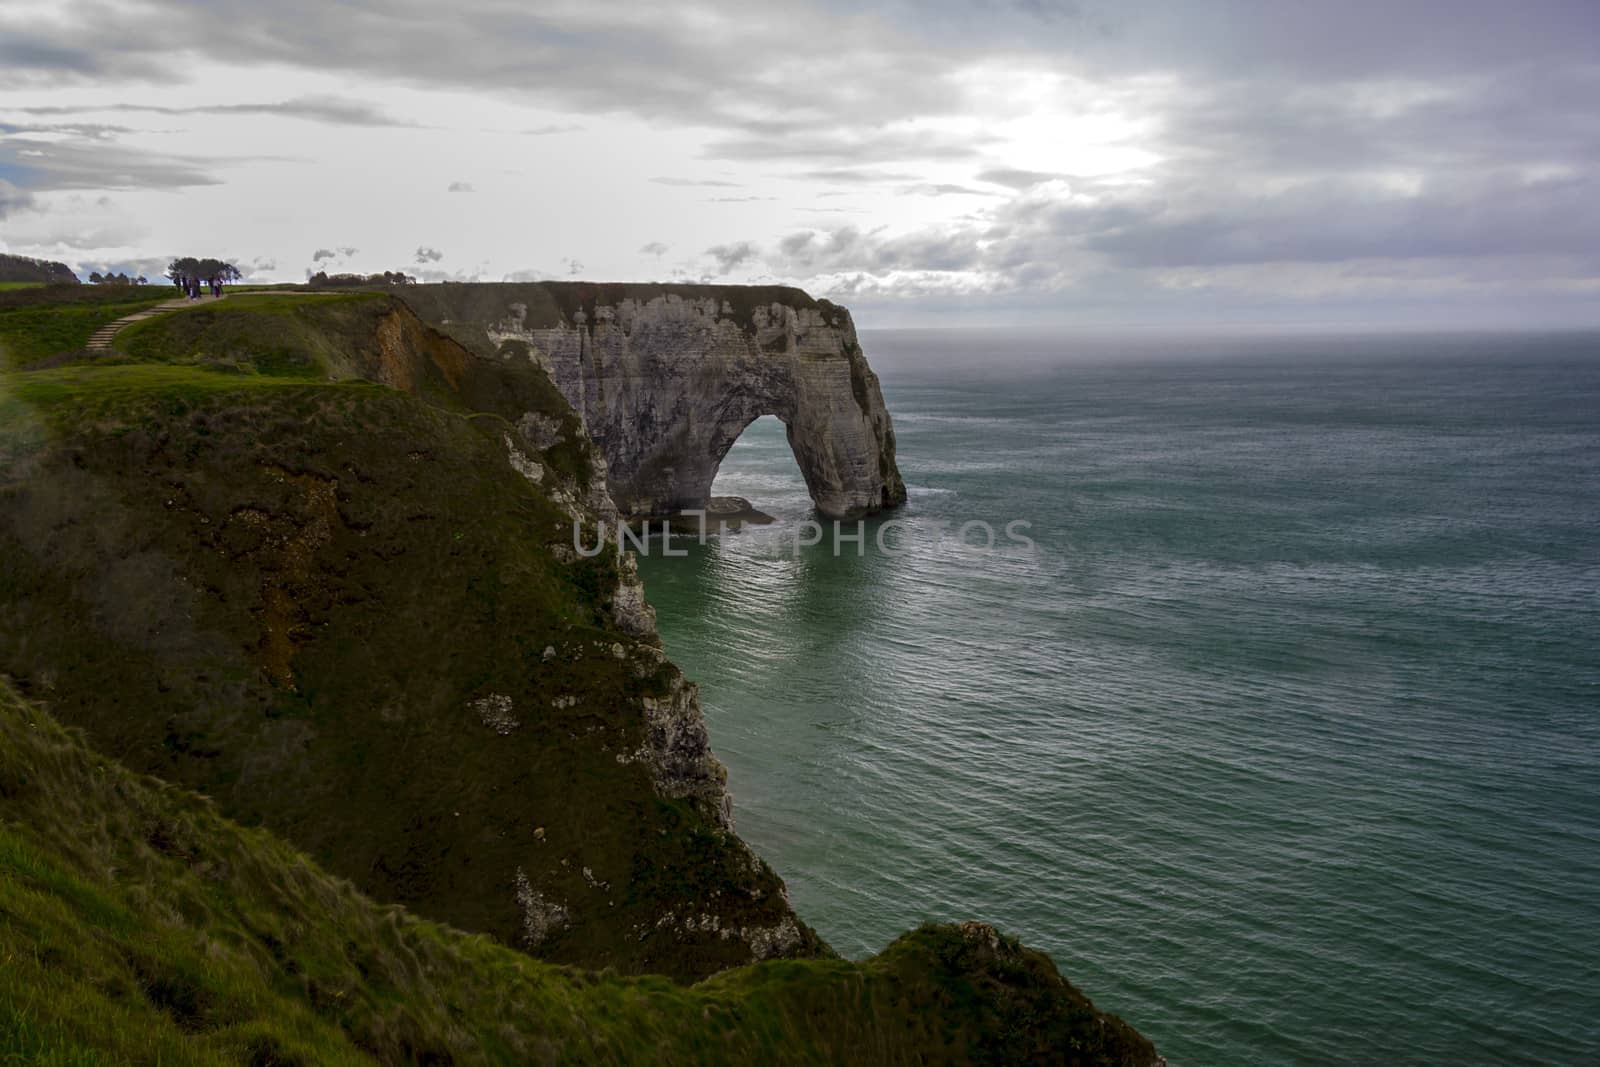 Etretat on the Upper Normandy coast in the North of France